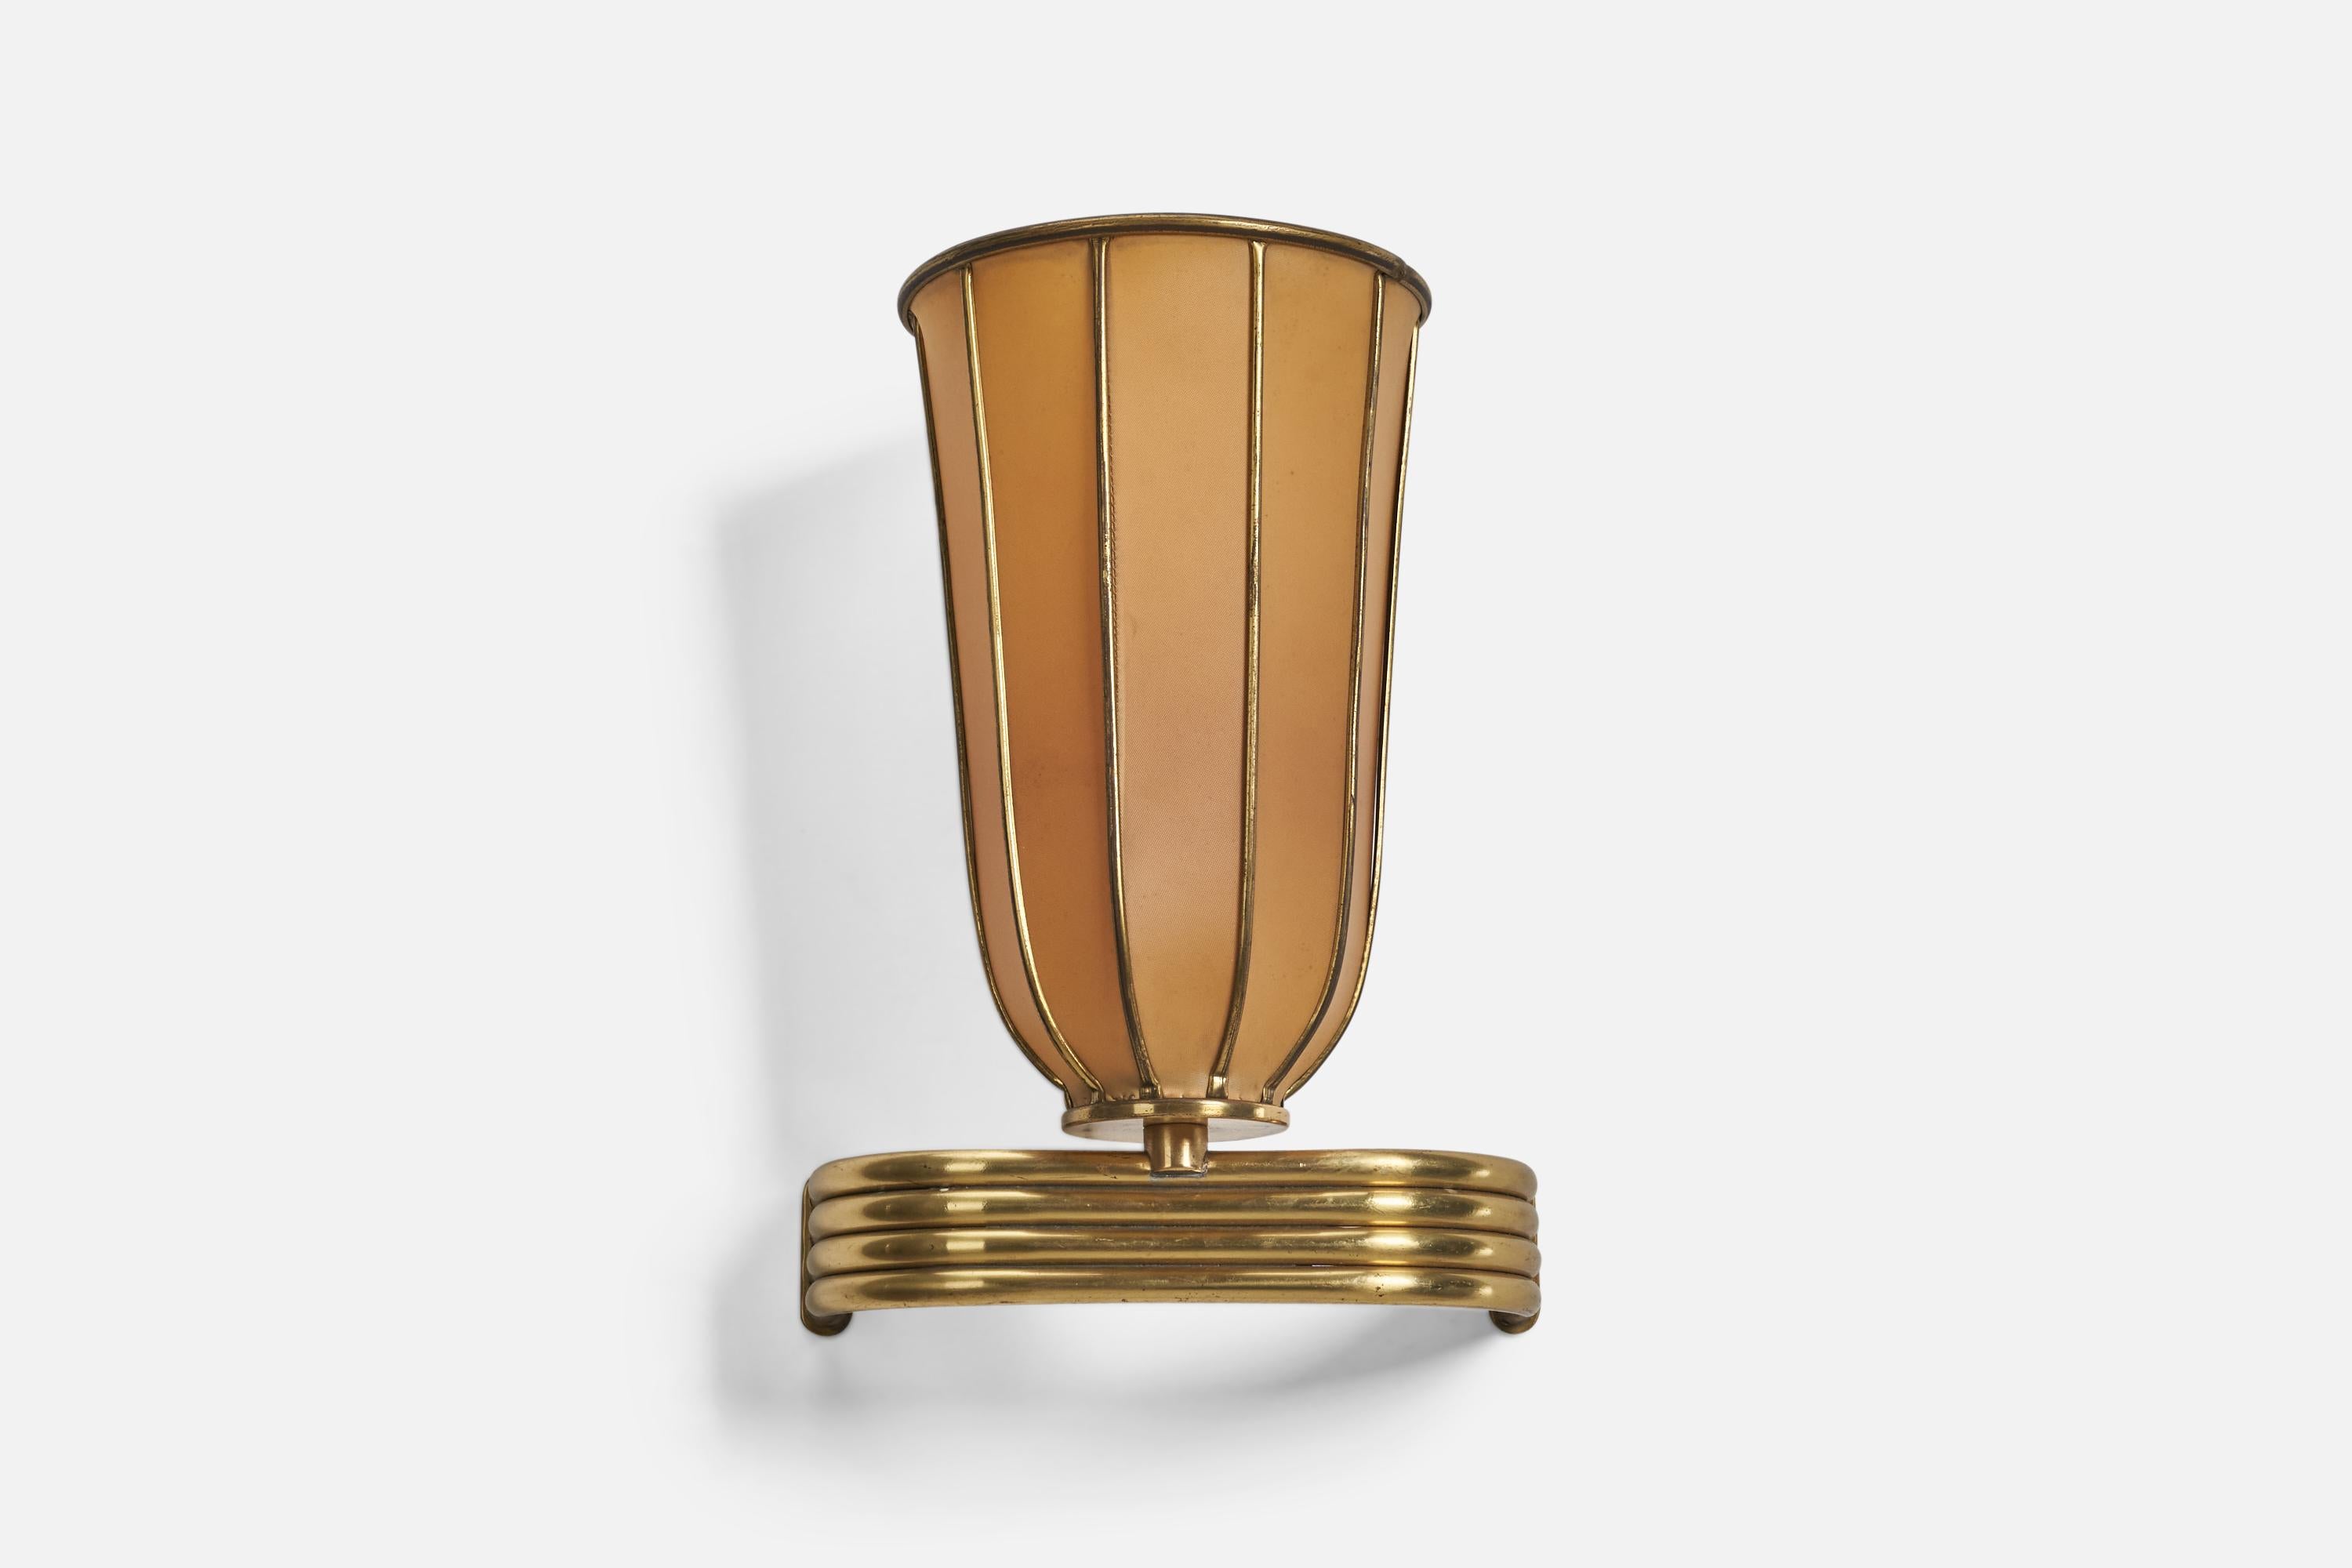 A brass, paper wall light designed and produced by an Austrian Designer, Austria, 1940s.

Dimensions of back plate (inches) : 3.5 x 3.5 x 0.5 (Height x Width x Depth)

Socket takes standard E-26 medium base bulb.

There is no maximum wattage